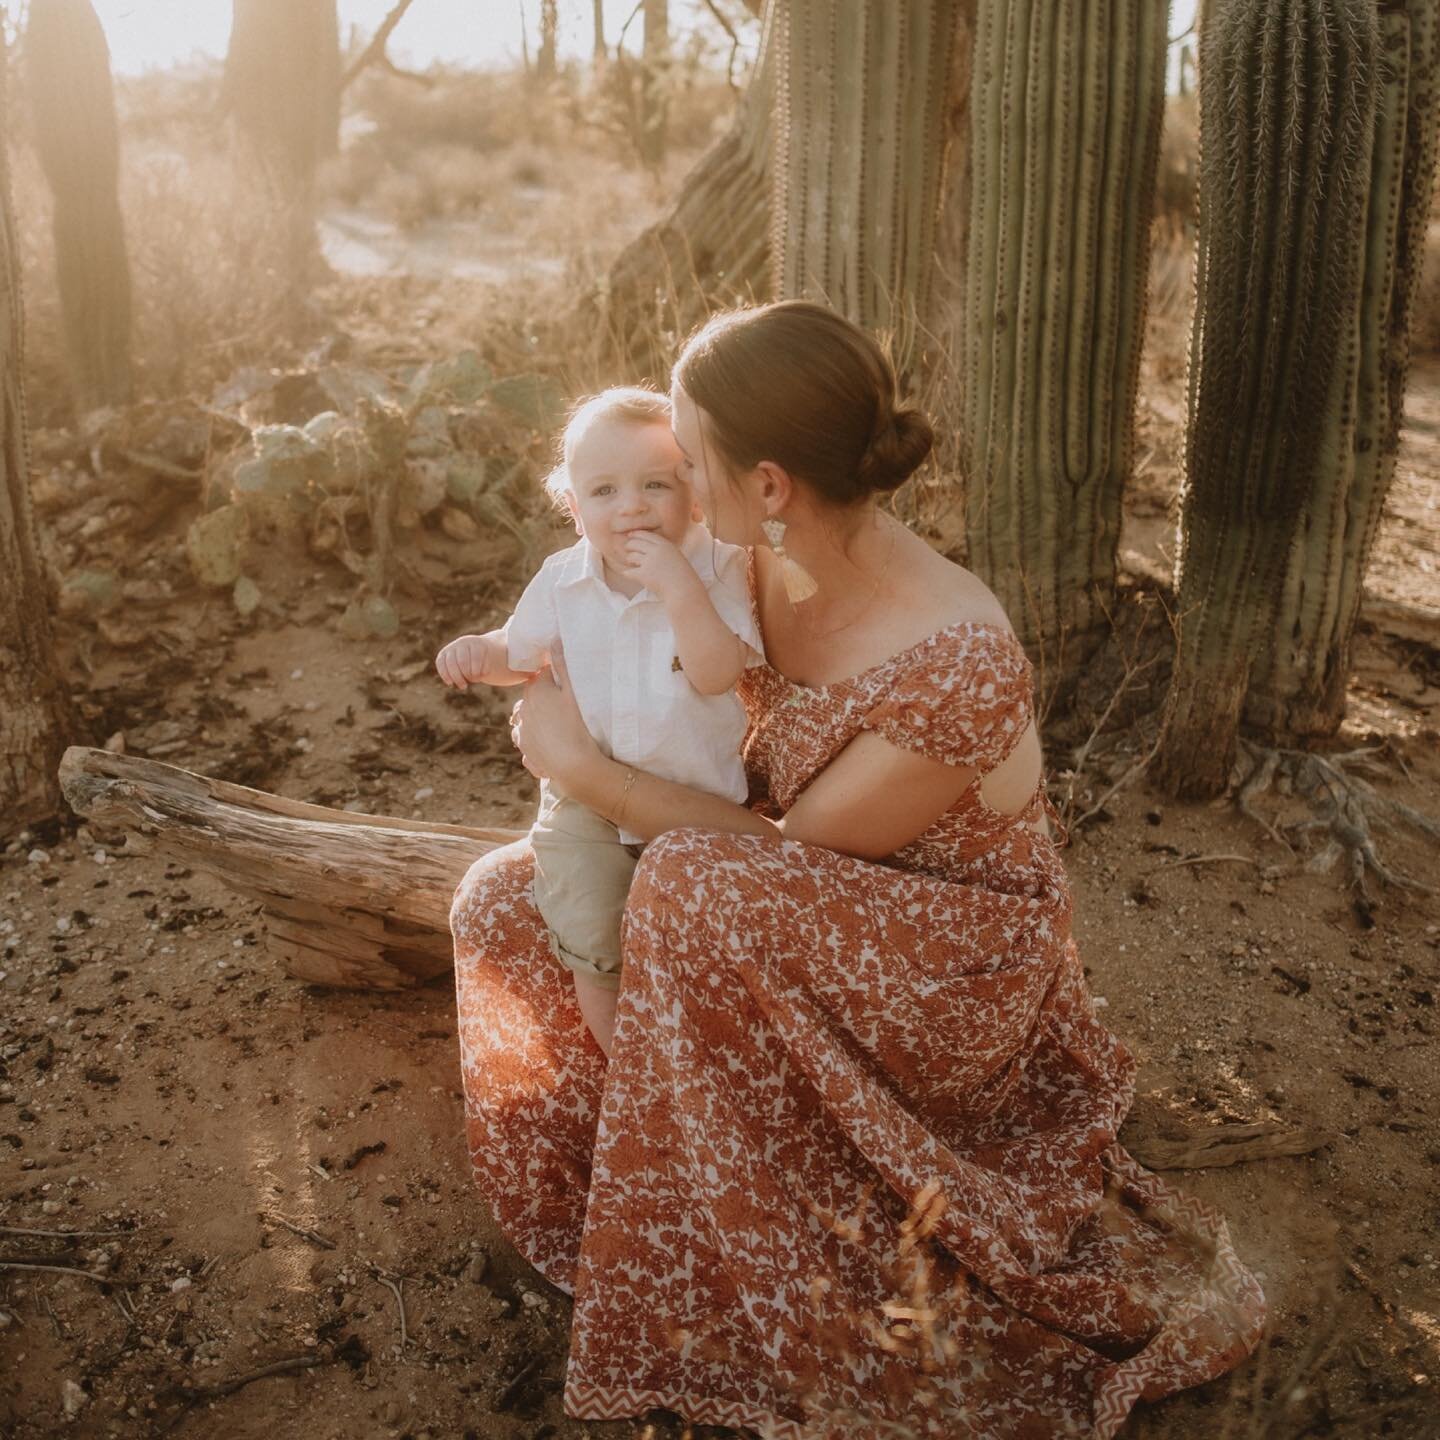 After some much needed time off I&rsquo;m happy to announce I&rsquo;m back at work &amp; couldn&rsquo;t be more excited to catch up on sharing some of my beautiful families from the past few months&hellip; This session was an absolute dream and will 